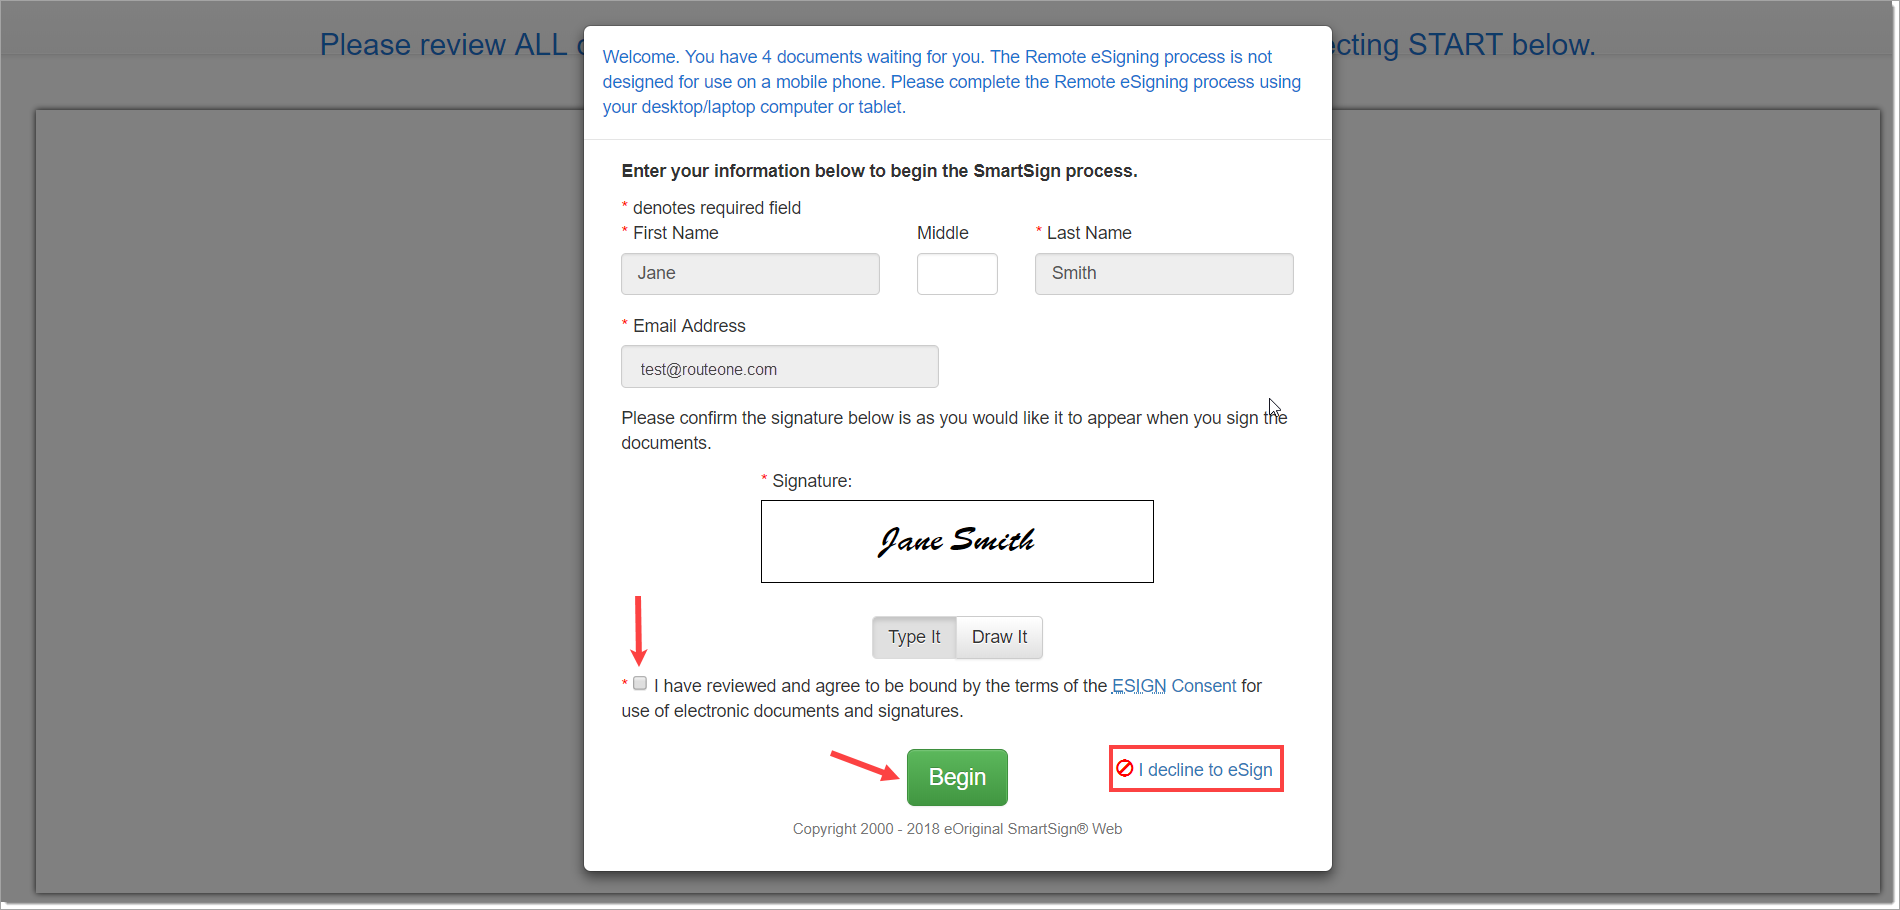 Checkbox to accept ‘ESIGN Consent,’ ‘Begin’ signing